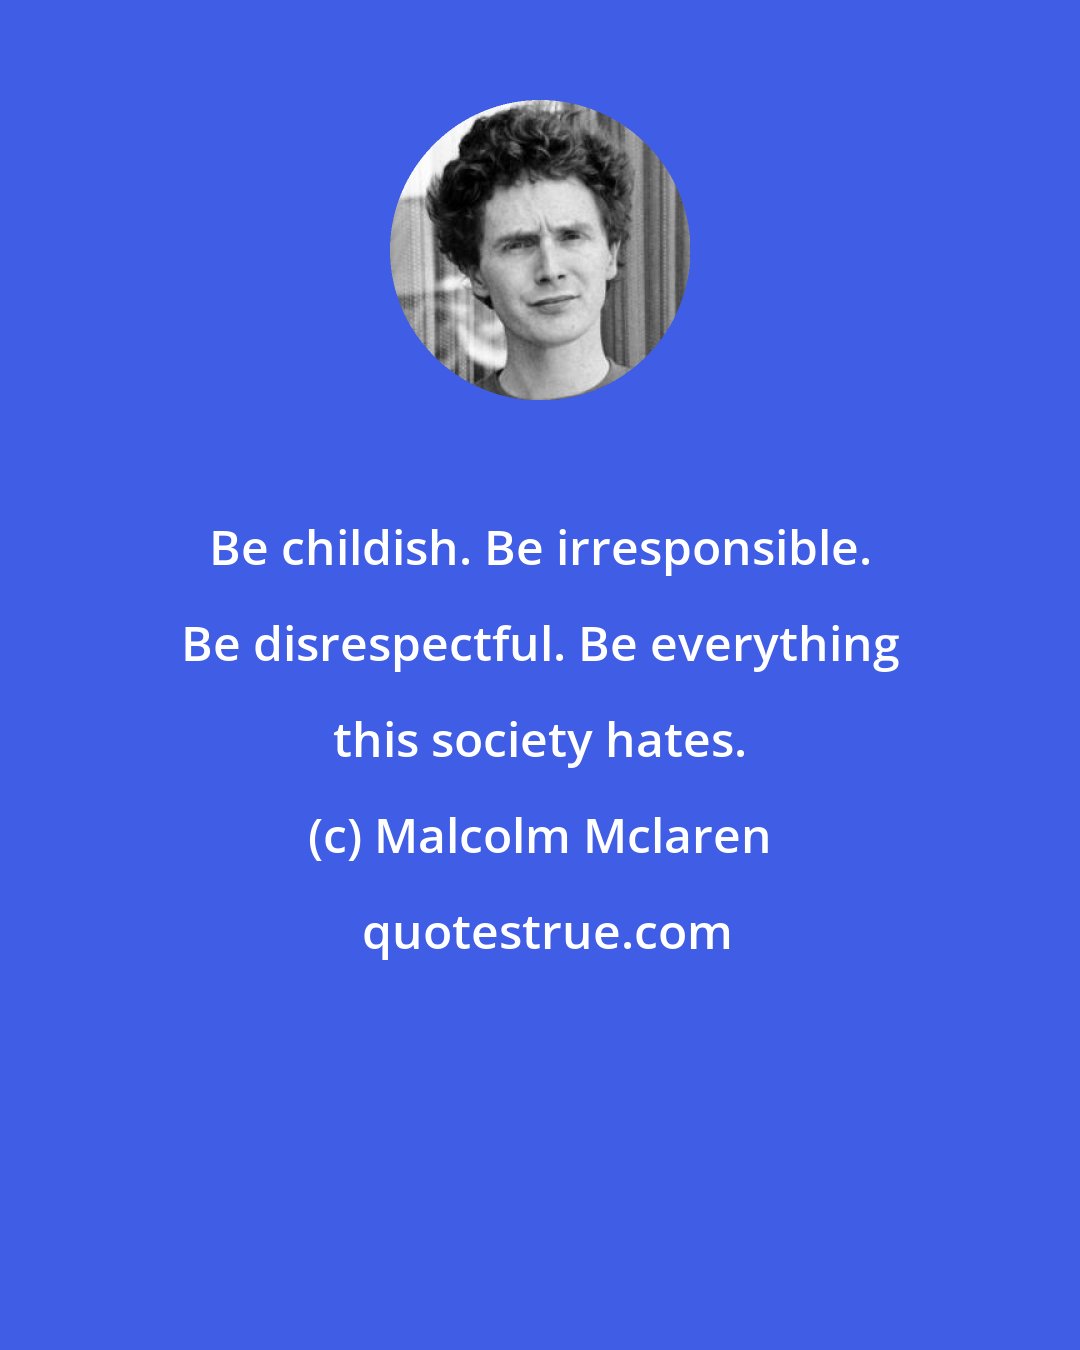 Malcolm Mclaren: Be childish. Be irresponsible. Be disrespectful. Be everything this society hates.